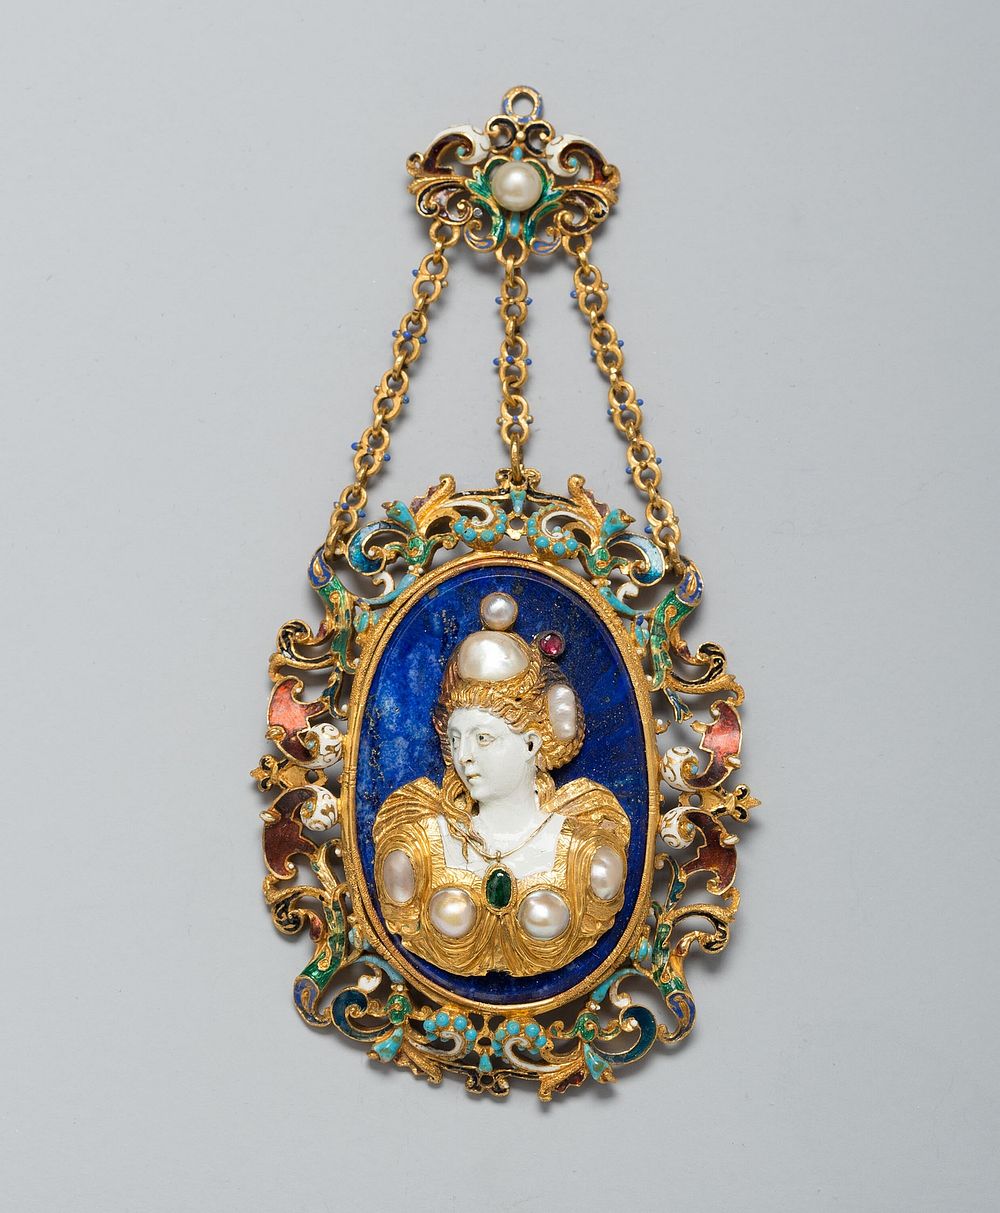 Pendant with the Bust of a Woman